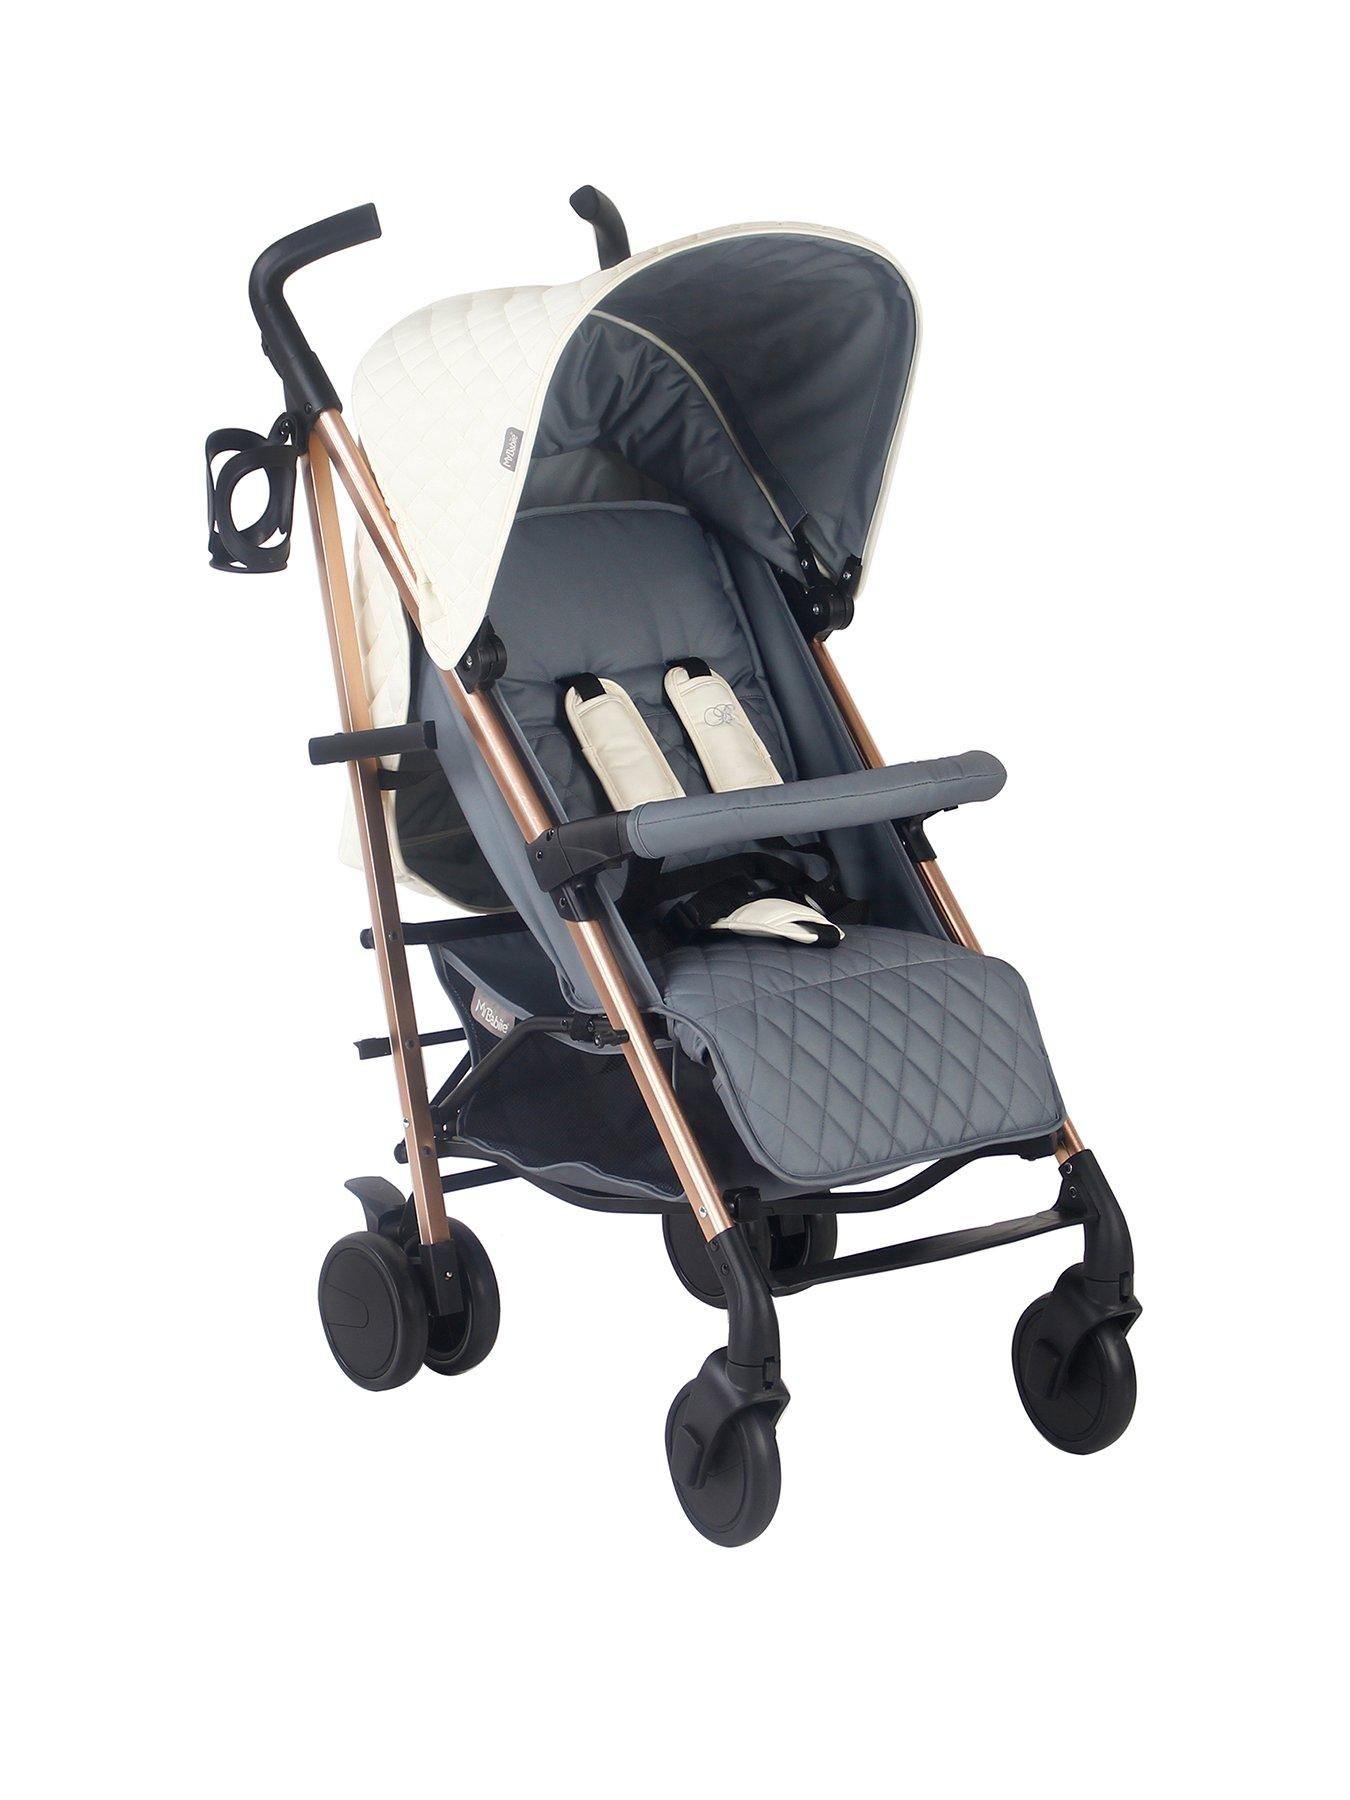 My Babiie Billie Faiers Mb51 Quilted Champagne Stroller